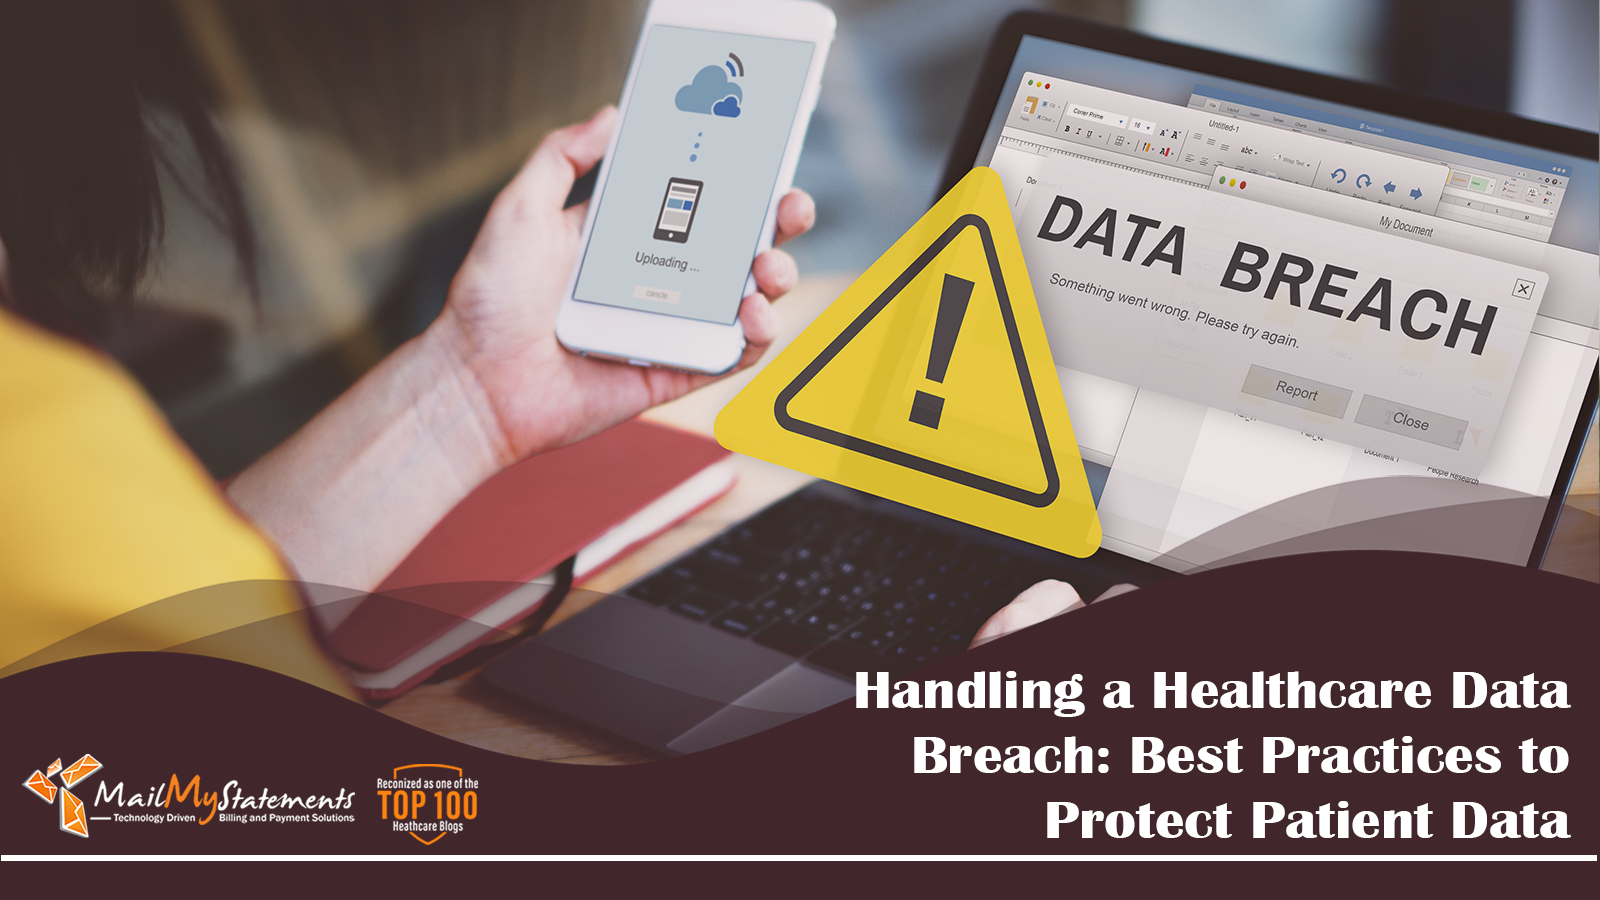 Handling a Healthcare Data Breach Best Practices to Protect Patient Data